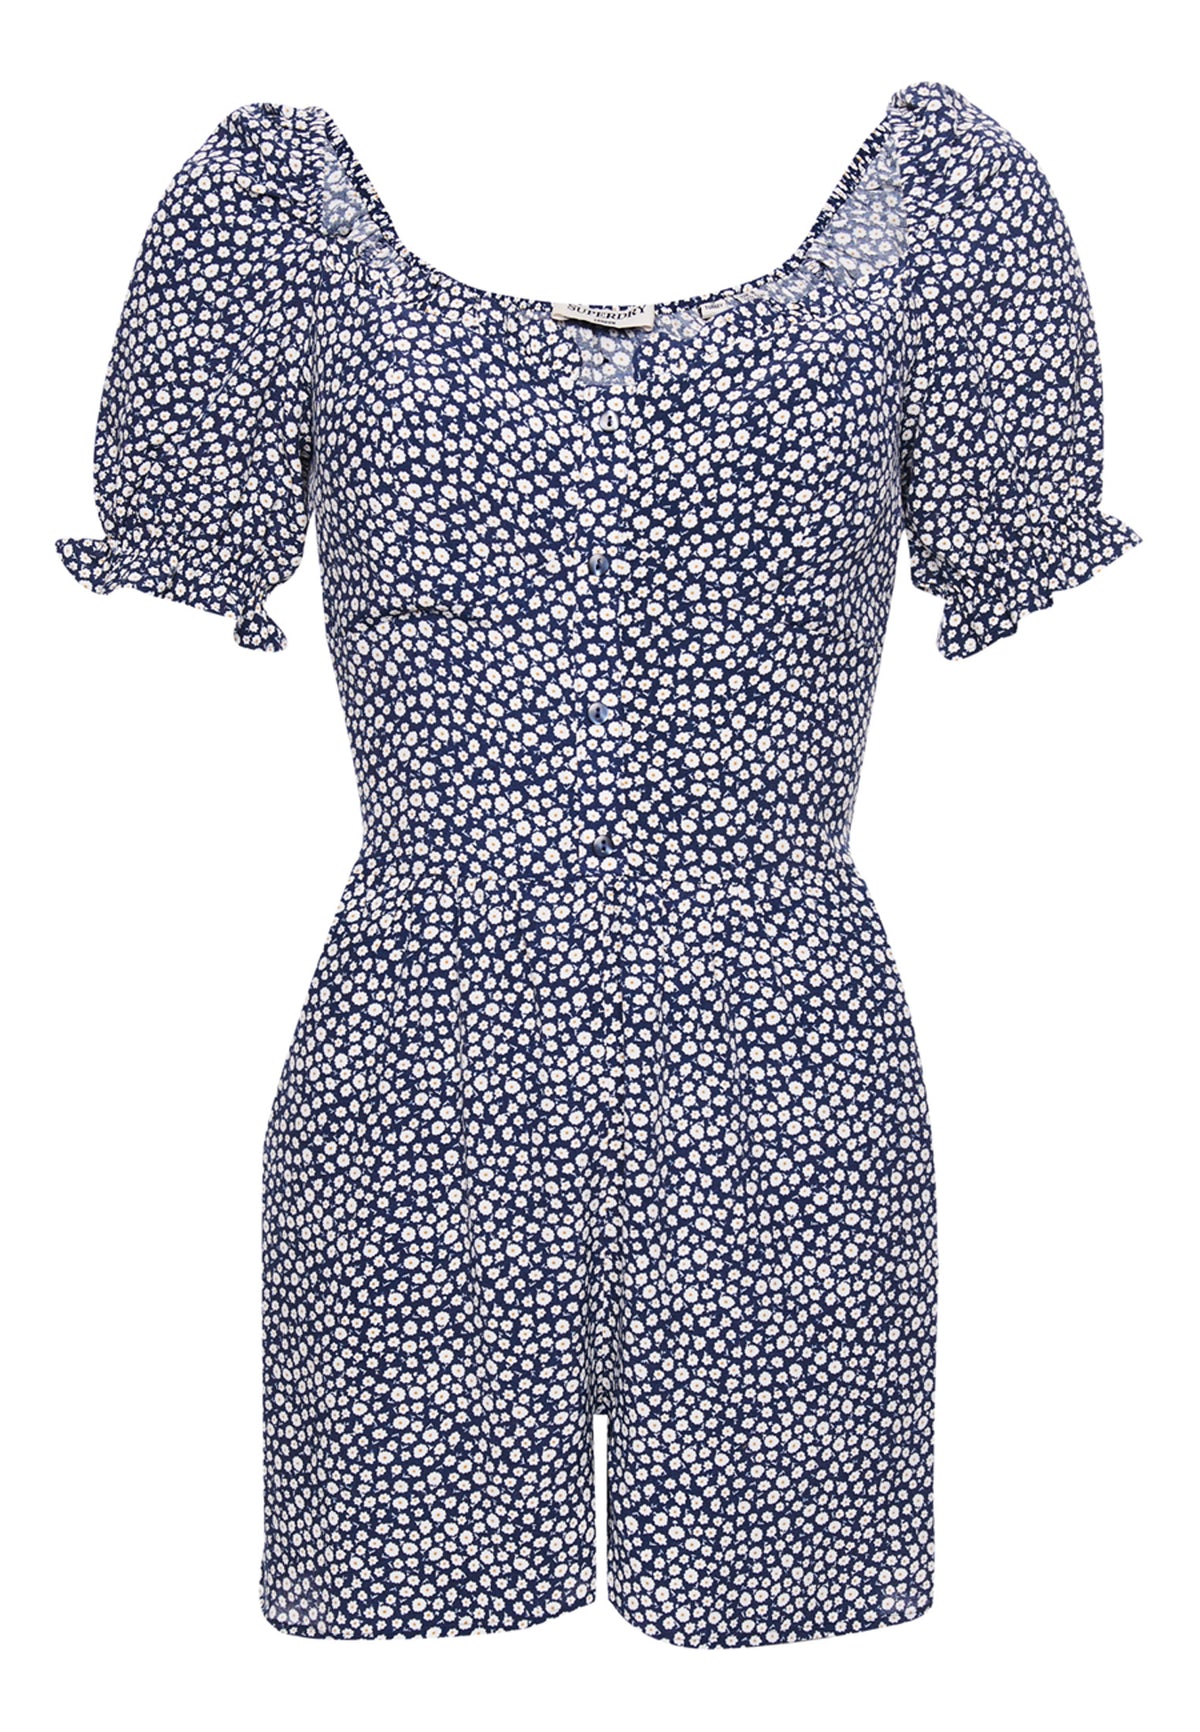 Quincy Summer Playsuit - Superdry Singapore